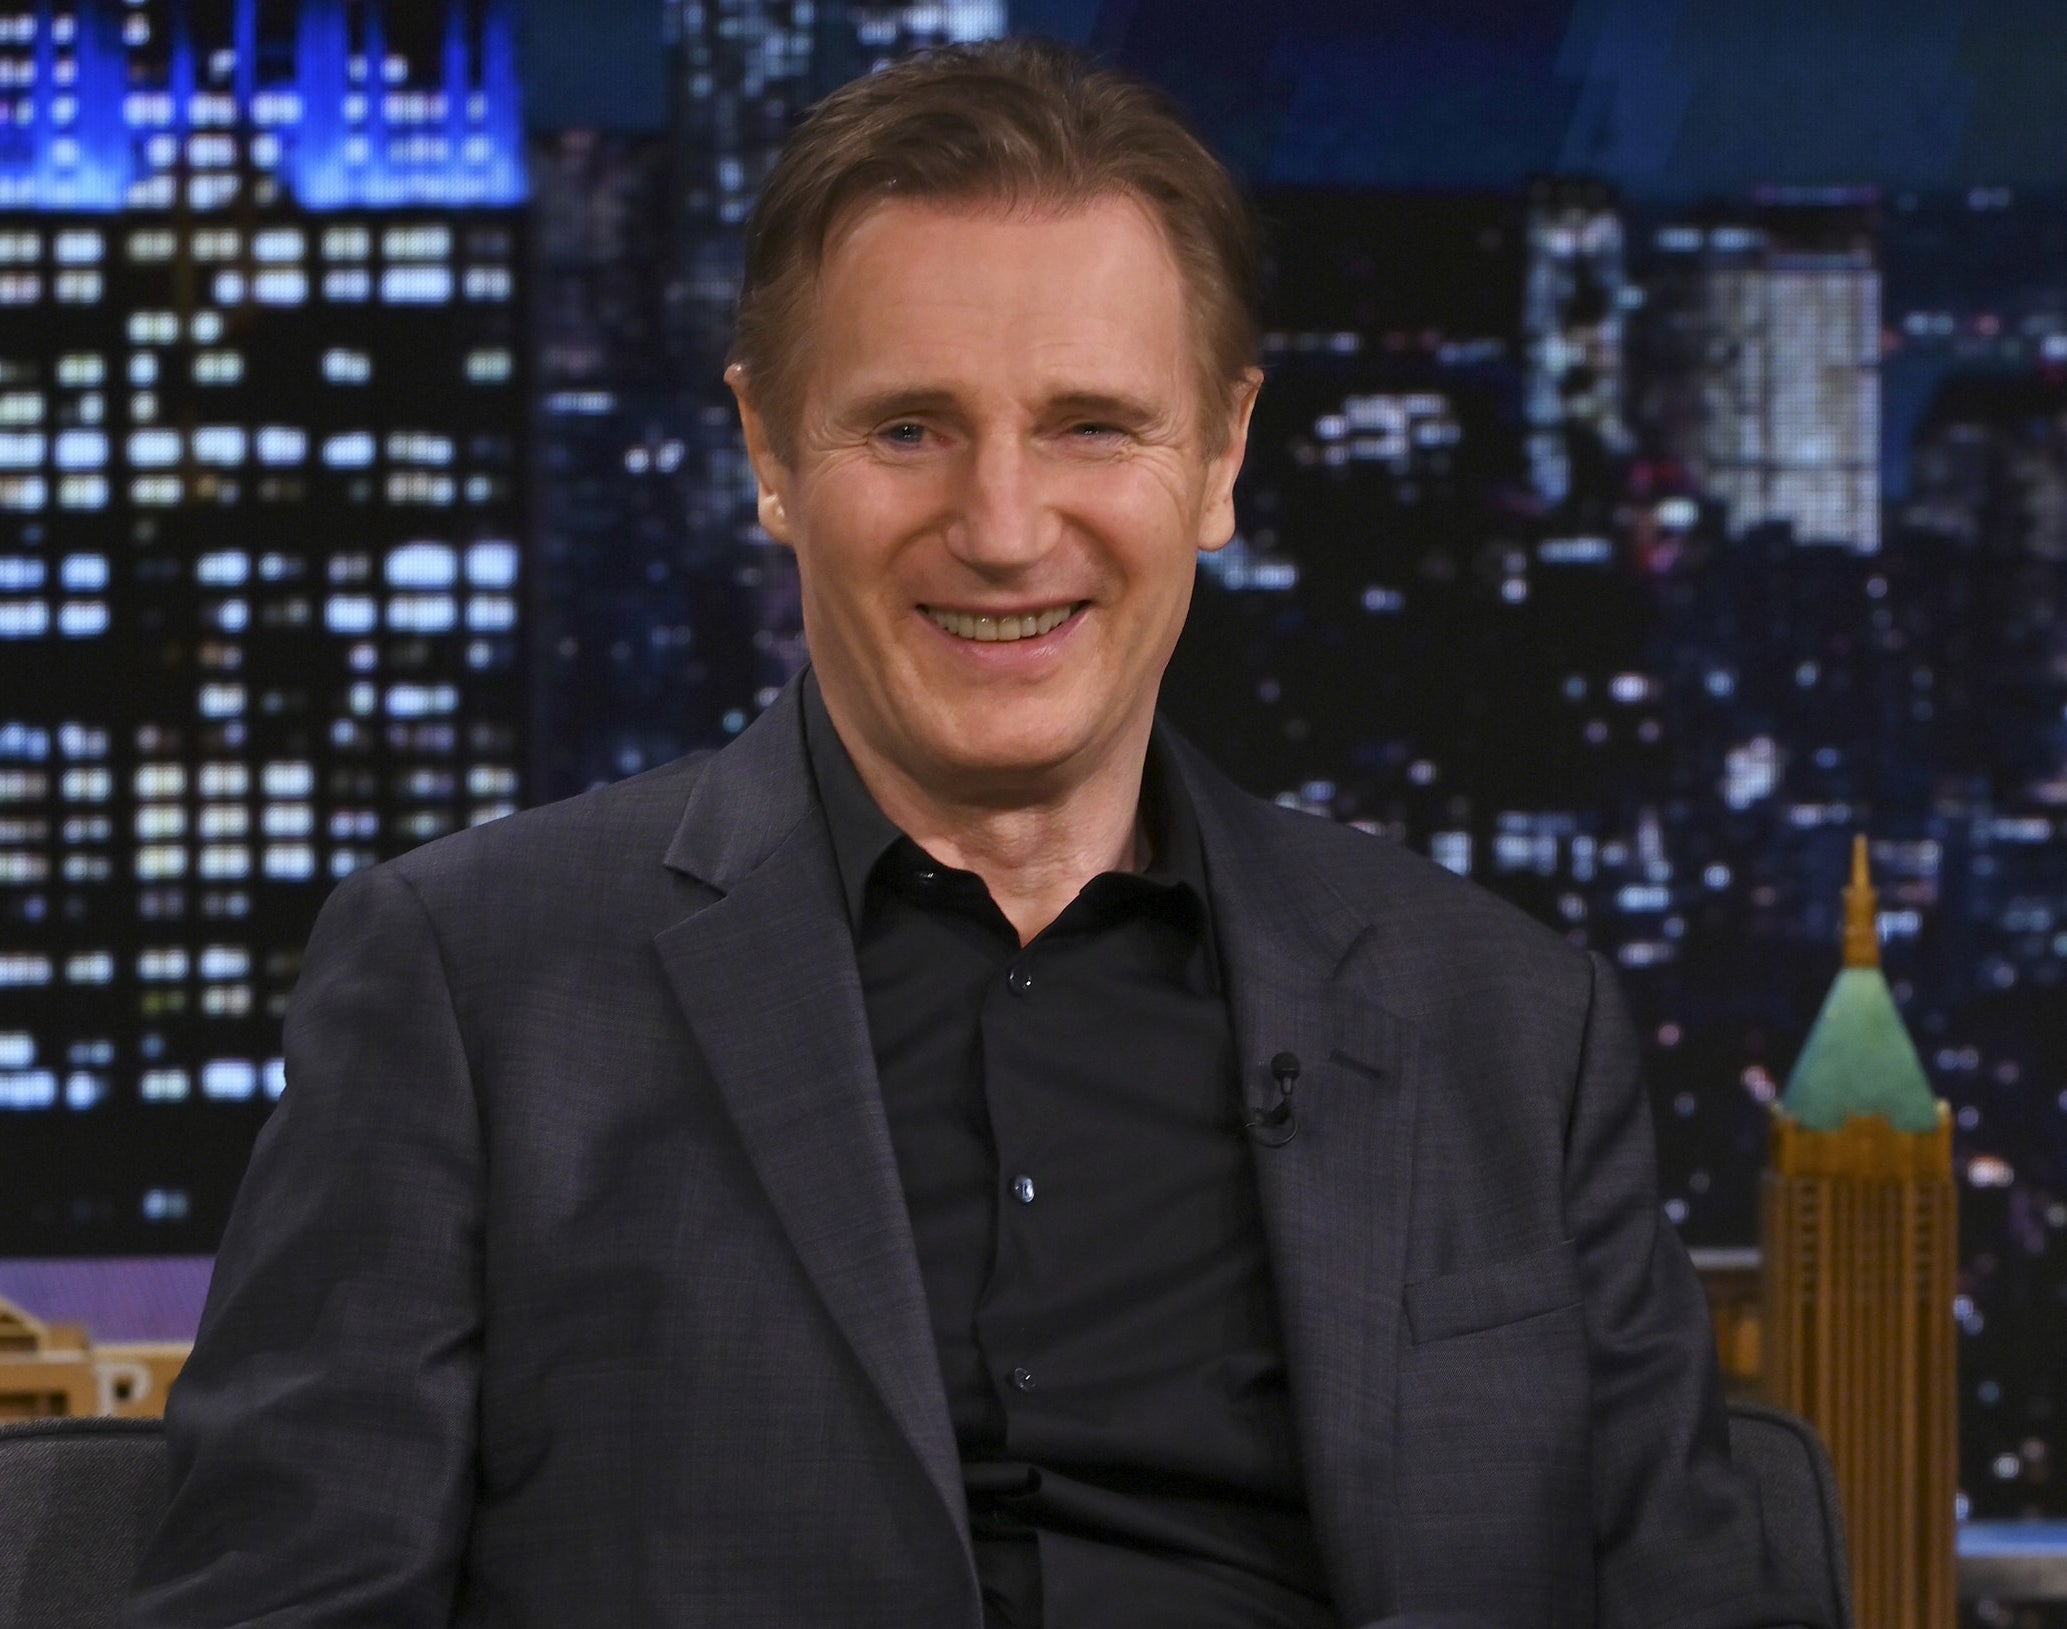 Liam Neeson during an interview on Tuesday, February 1, 2022